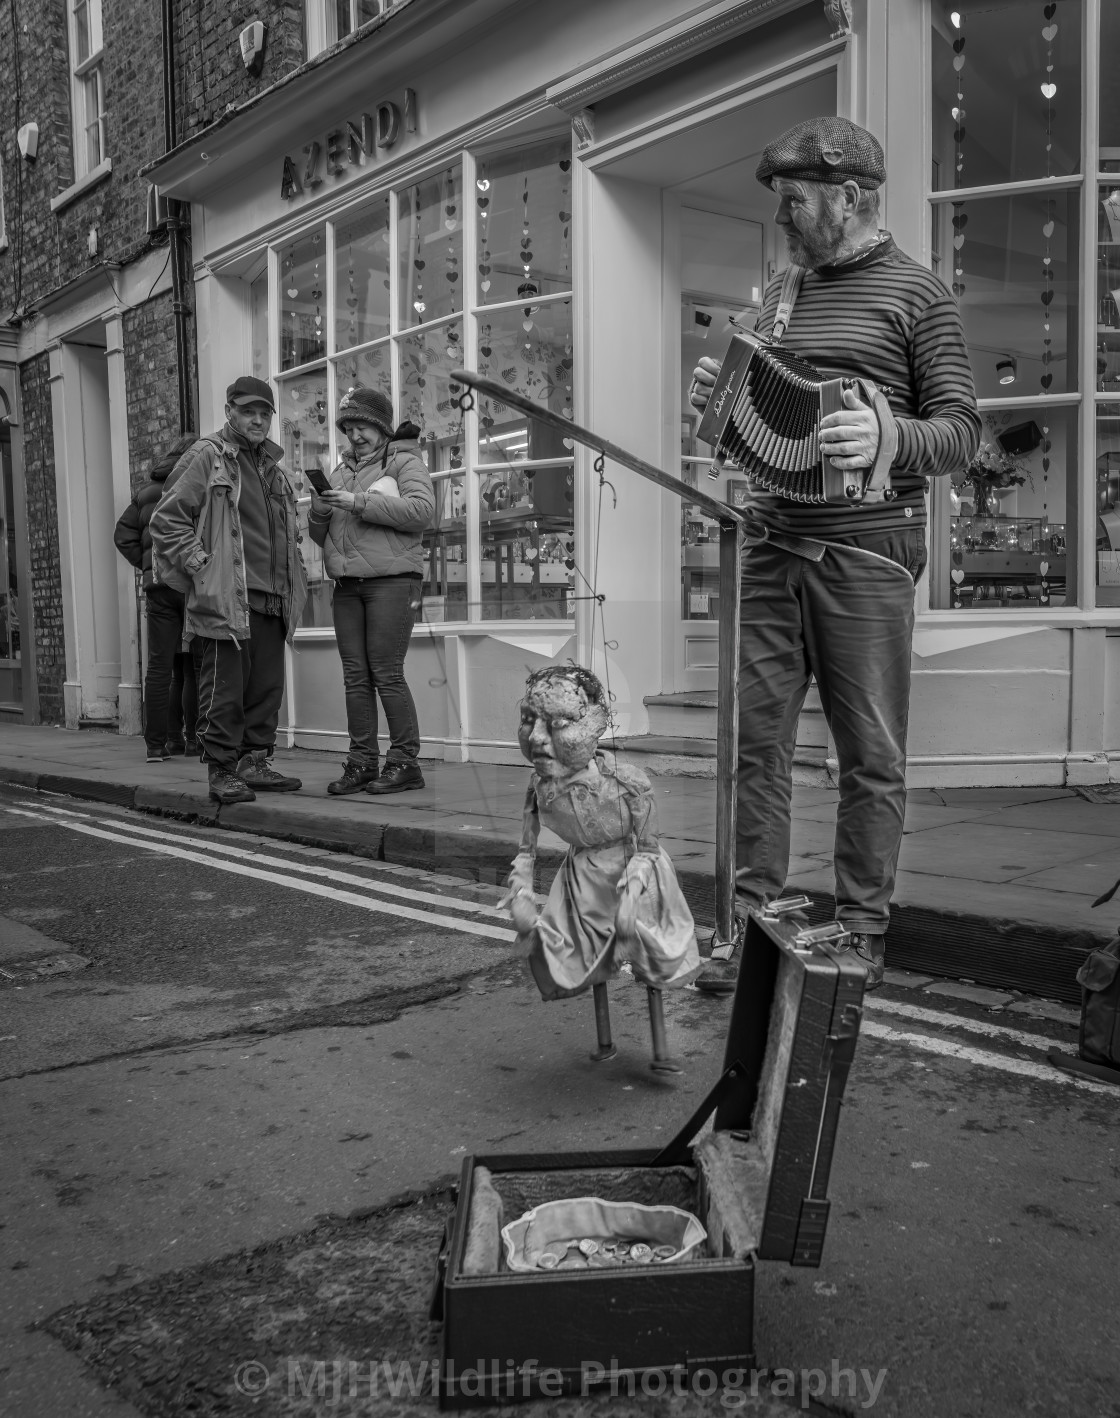 "A Busker York the Shambles" stock image